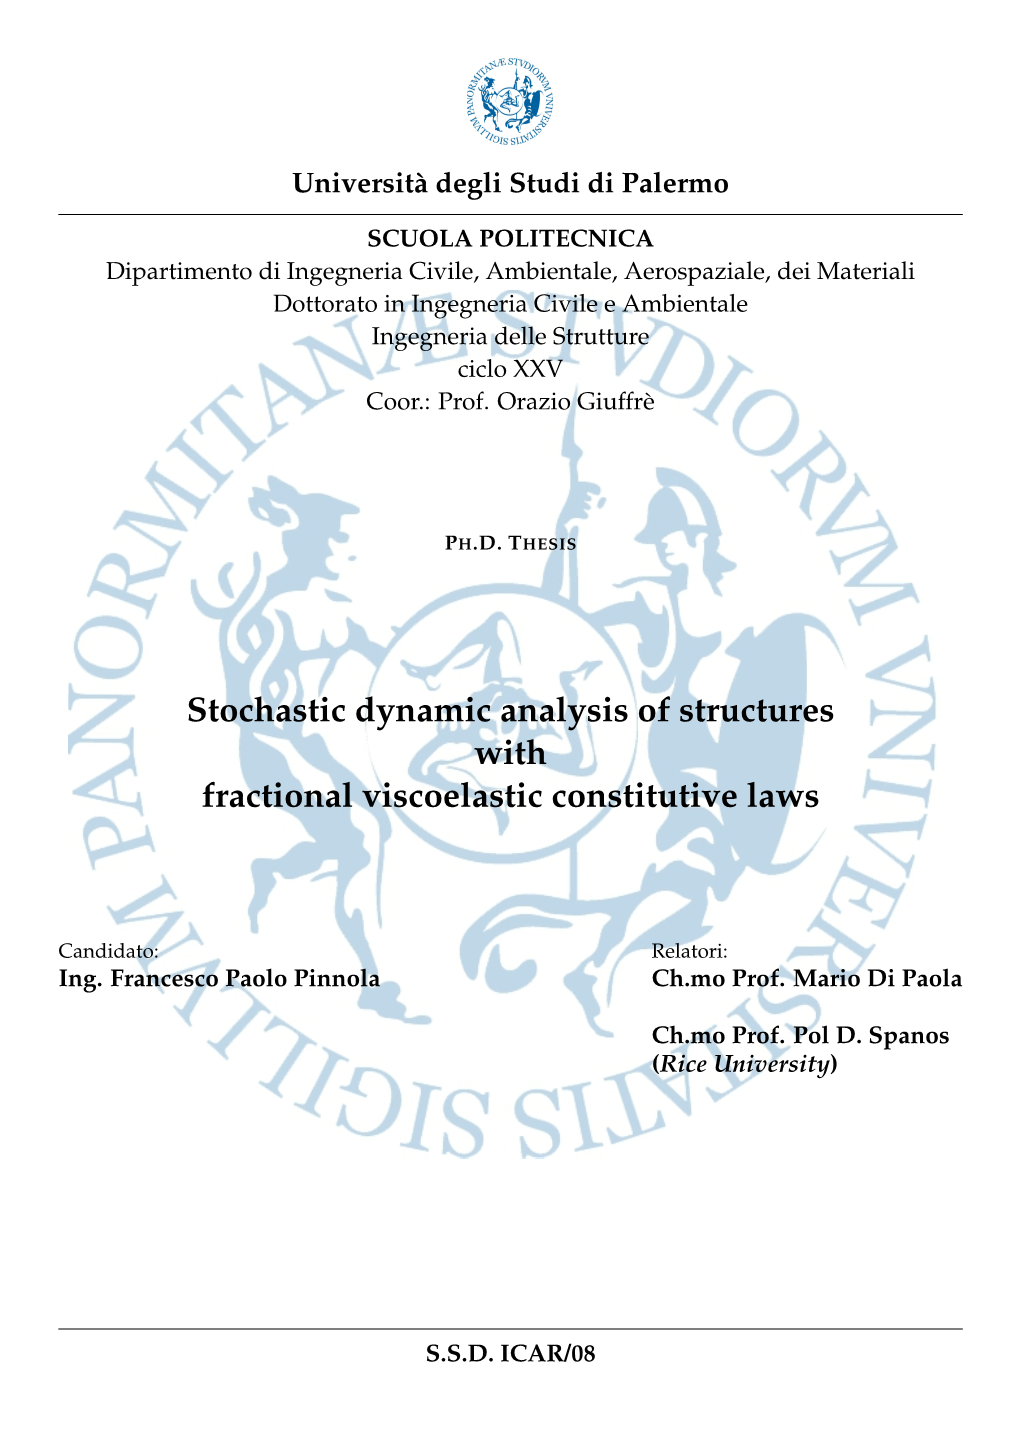 Stochastic Dynamic Analysis of Structures with Fractional Viscoelastic Constitutive Laws